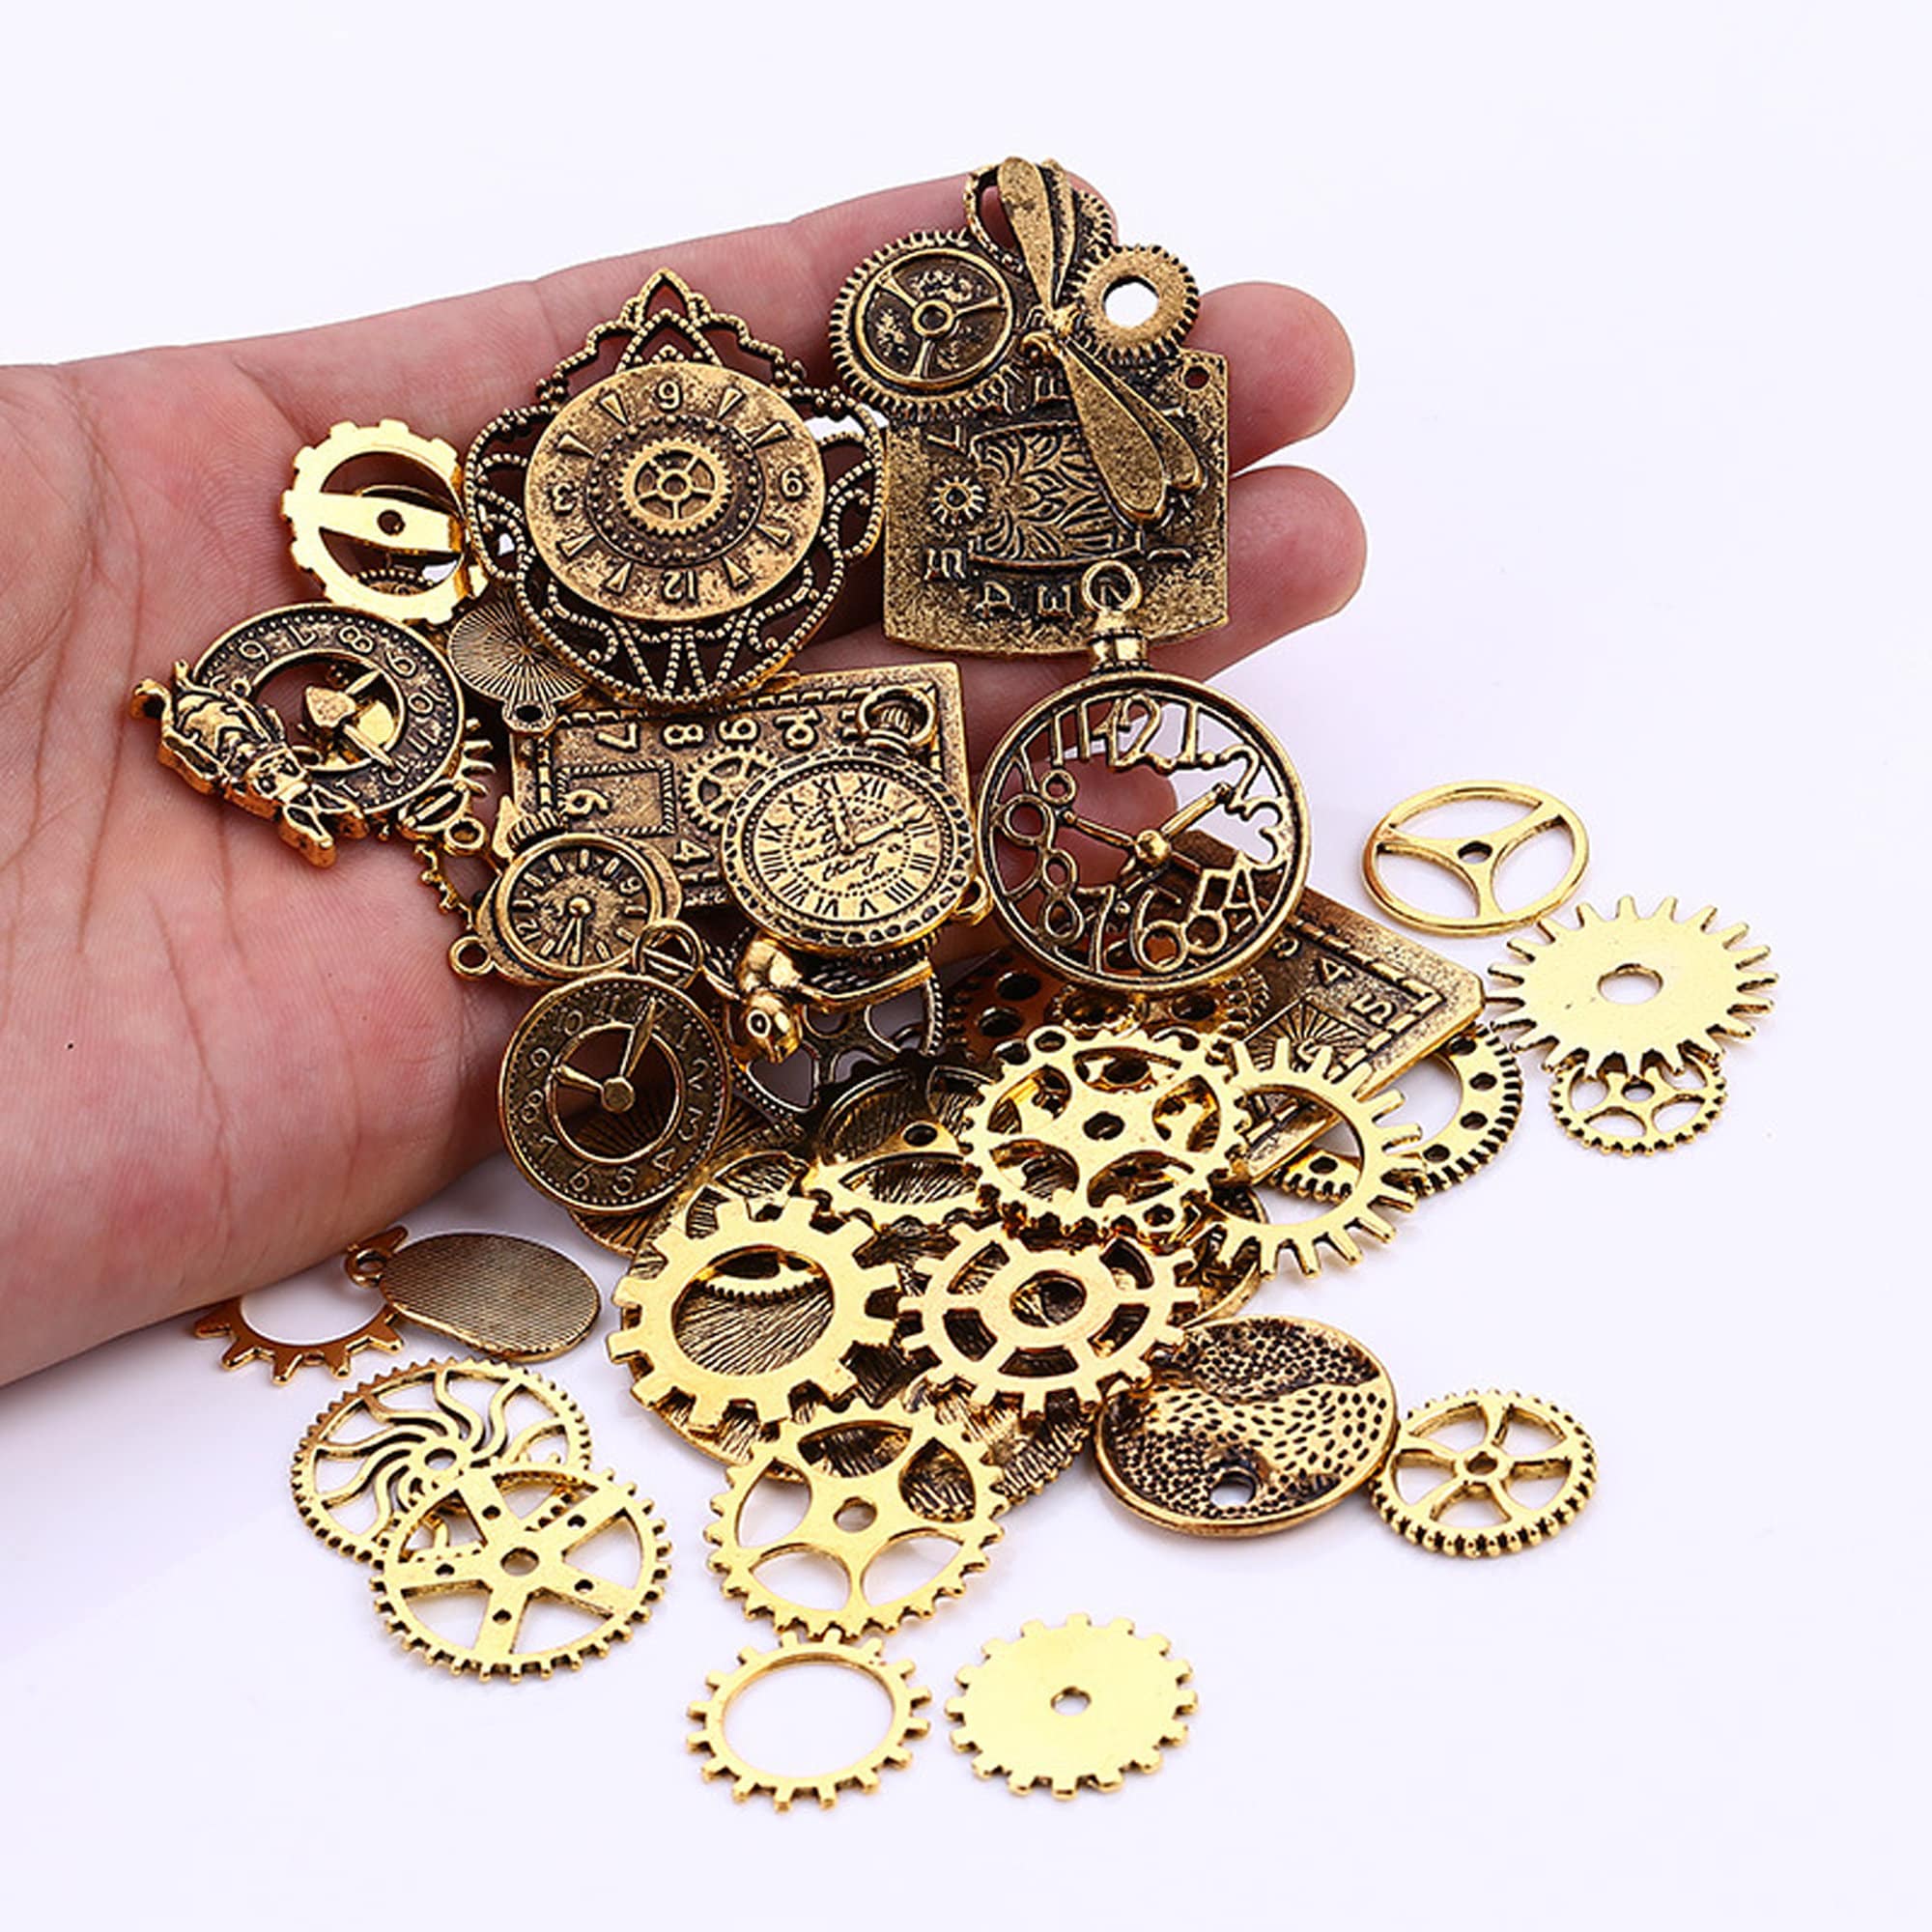 Stamped Brass Charms Lot of 185 Steampunk Jewelry Charms Bulk Destash of  Brass Stamped Mixed Lot of All Themes Charms 